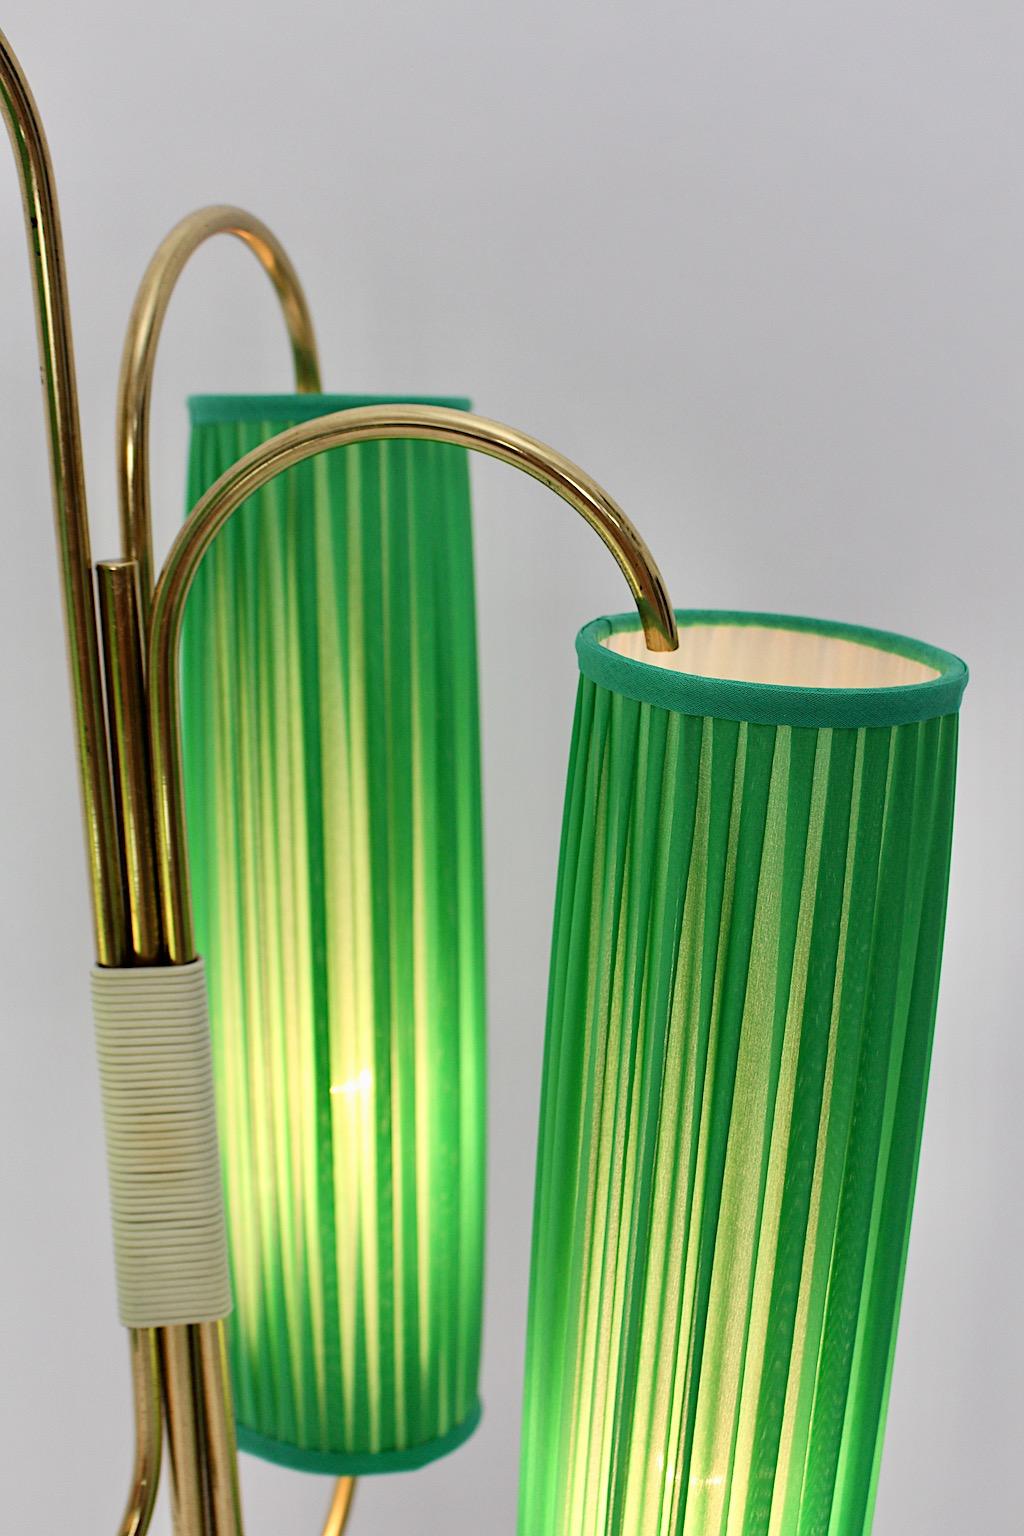 Italian Mid Century Modern Vintage Brass Floor Lamp with Grass Green Pleated Shades 1950 For Sale